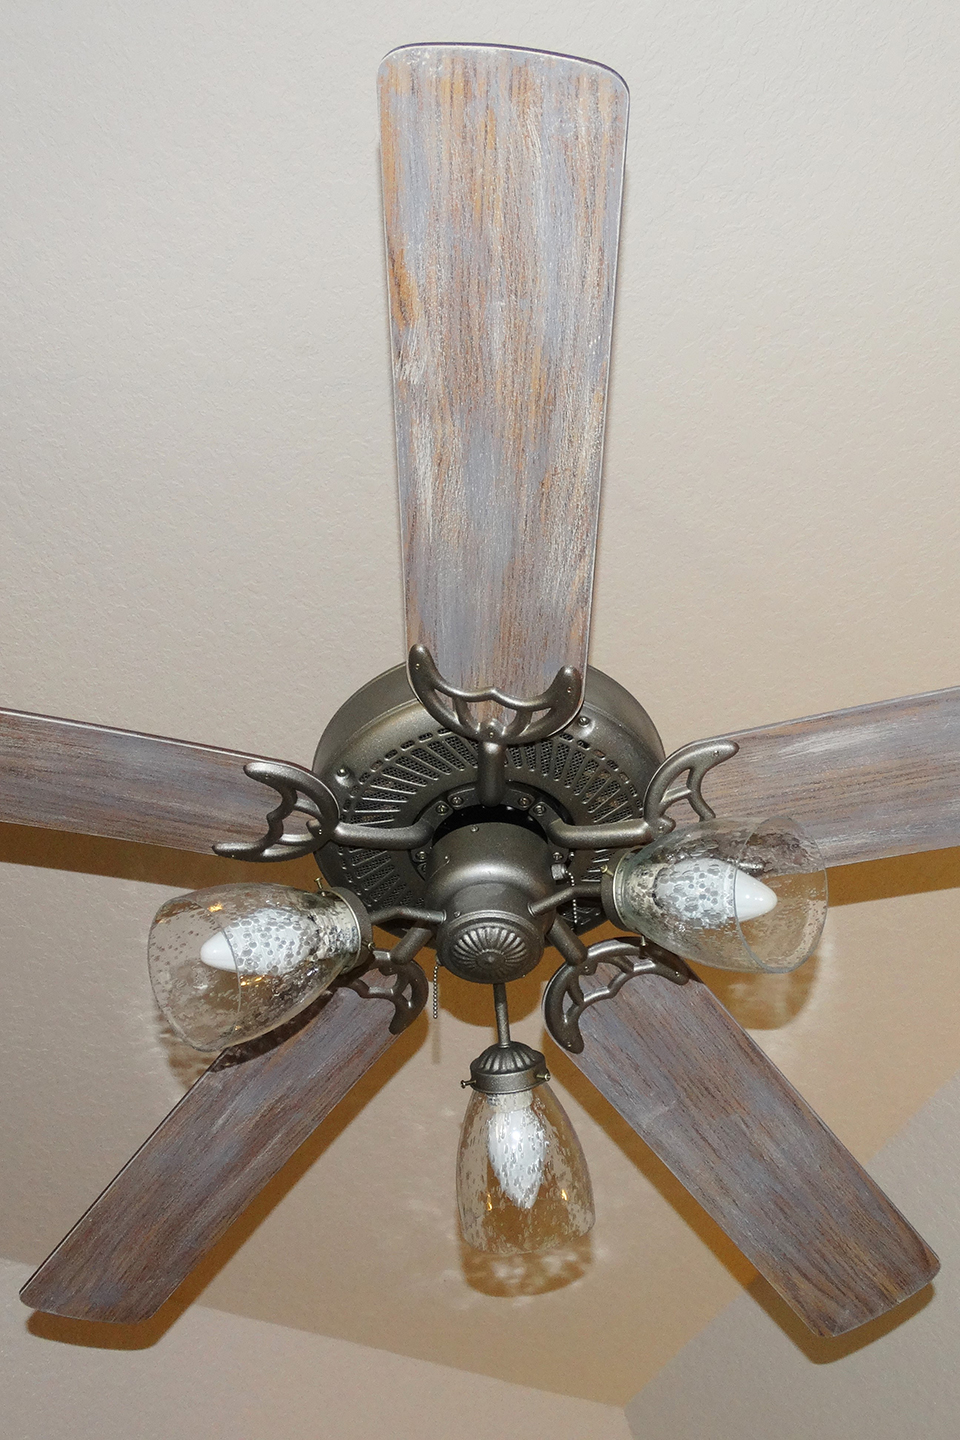 Dry-brushed wood ceiling fan blades